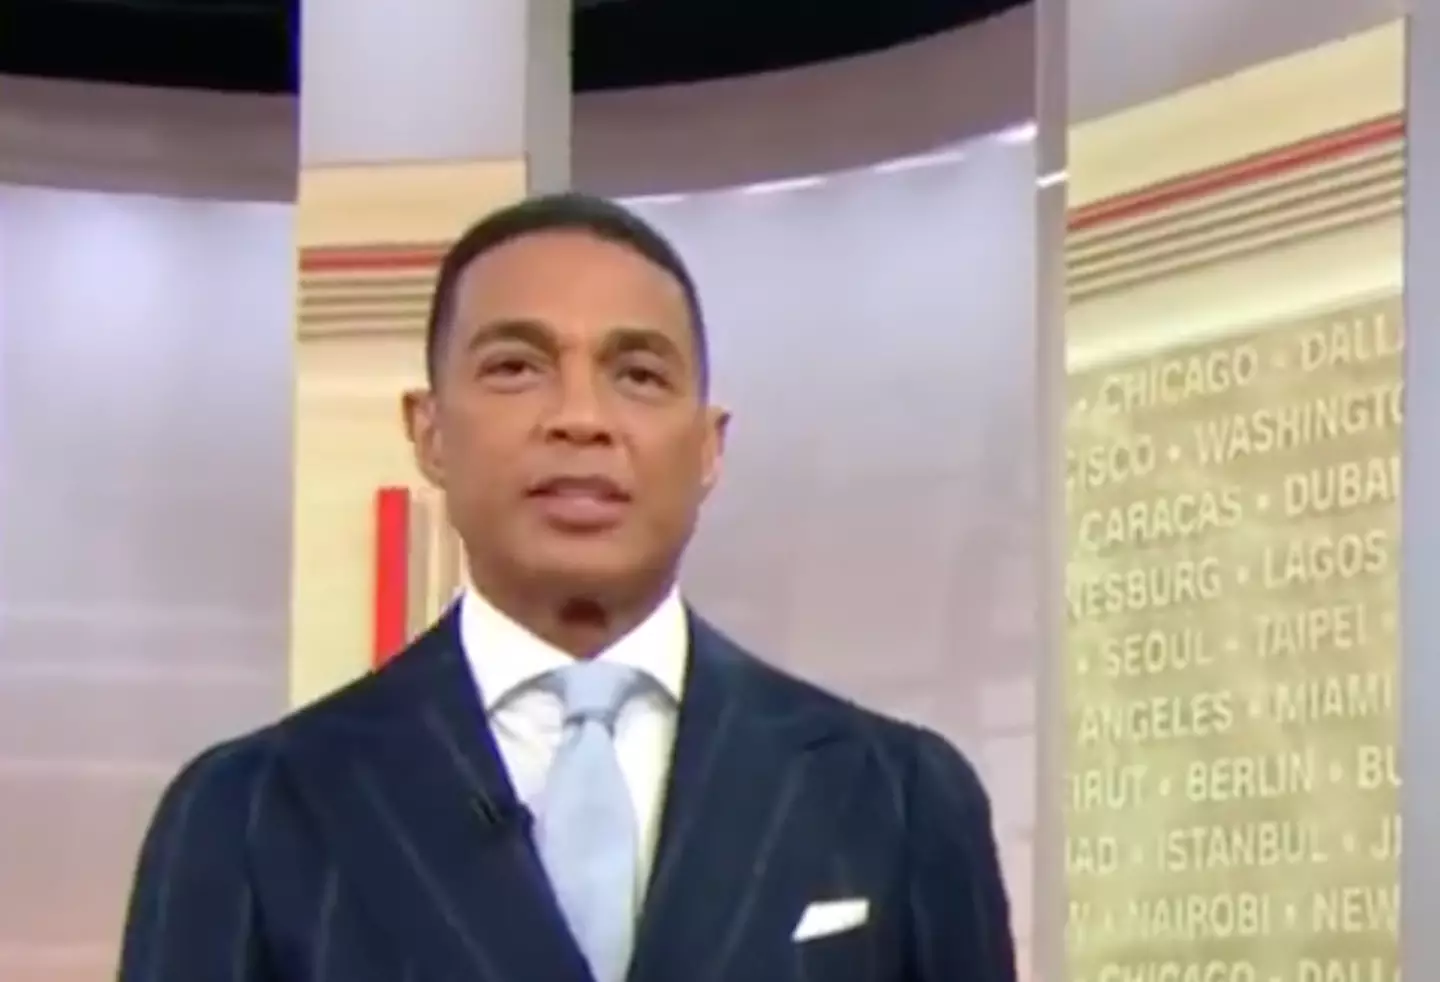 Don Lemon worked at CNN for 17 years.